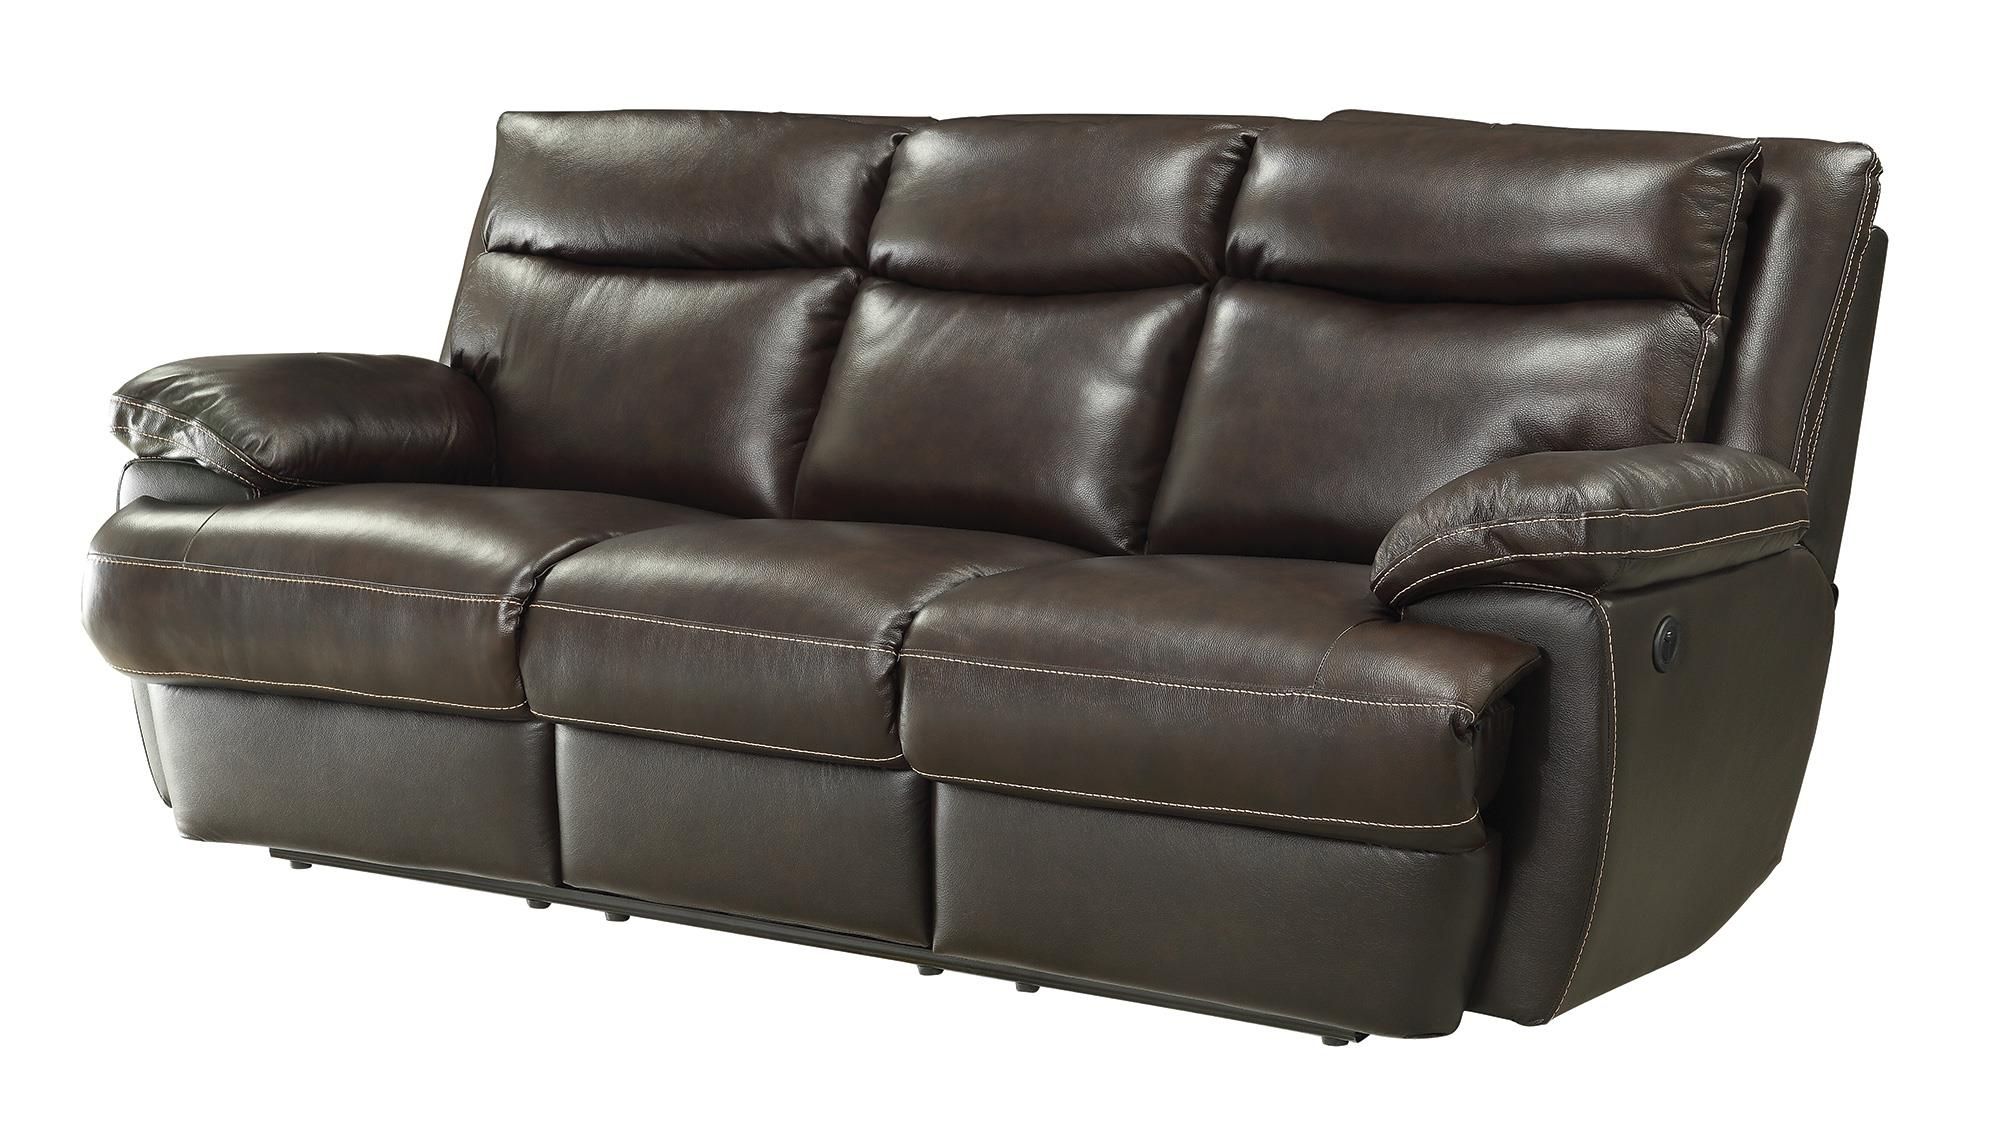 Espresso Faux Leather Ac And Usb Ottomans In Most Up To Date Macpherson Casual Reclining Sofa With Usb Charging Ports (View 5 of 10)